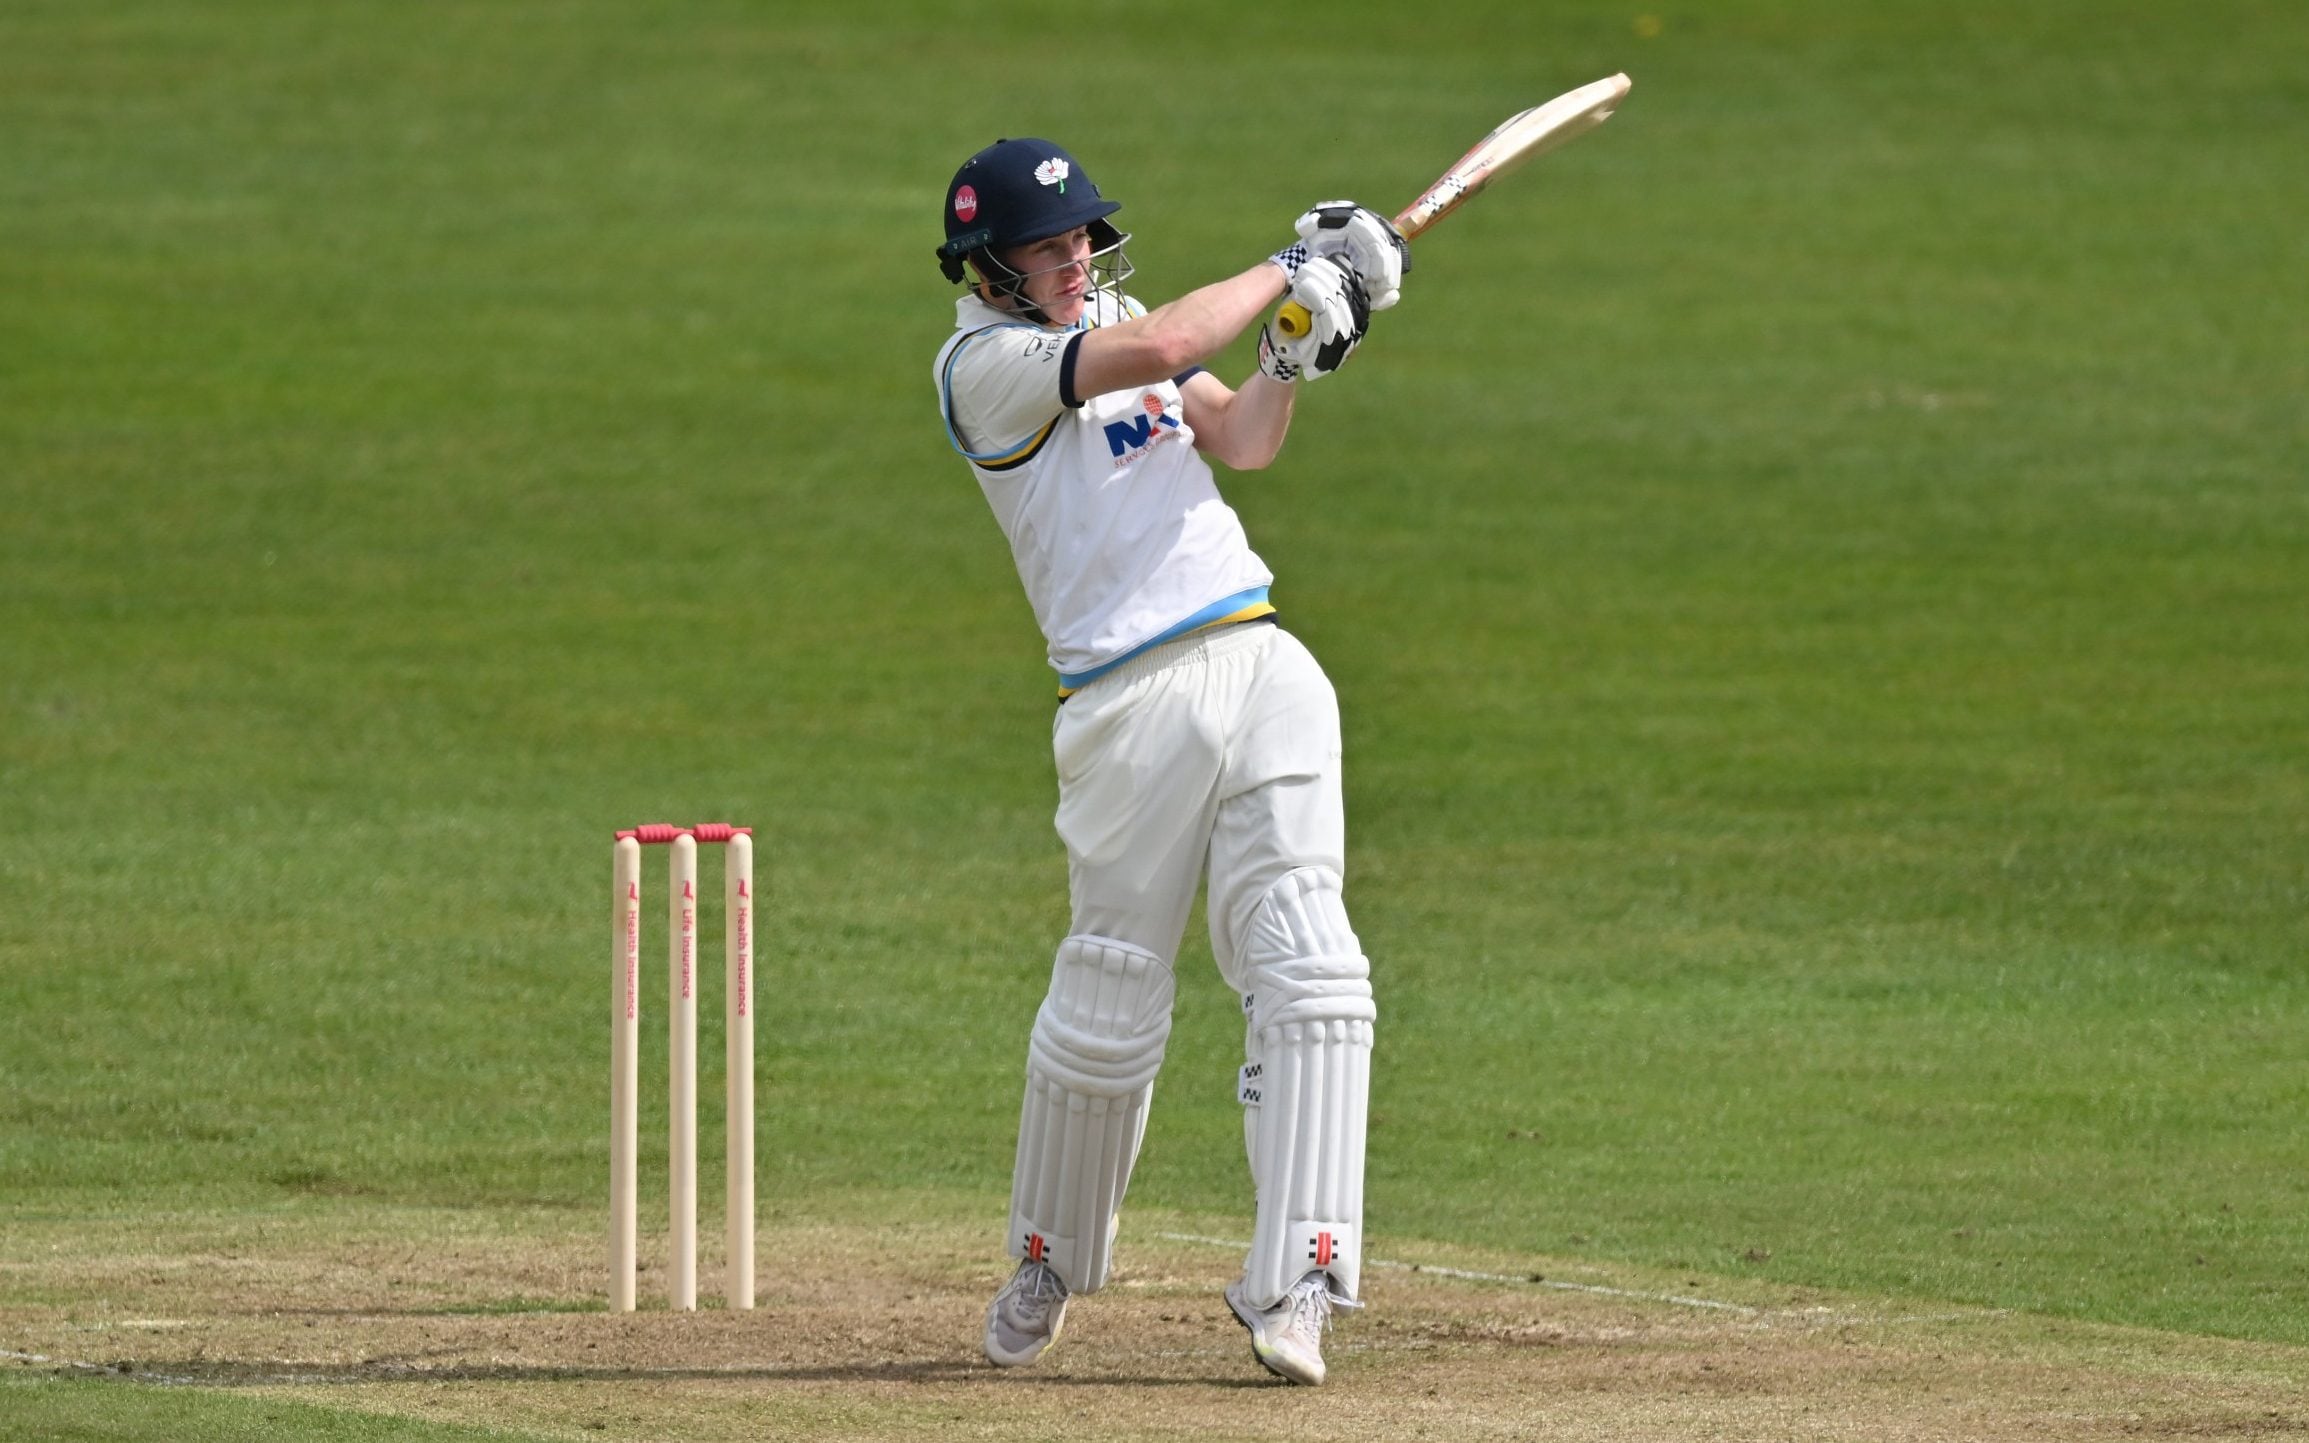 familiar problems for joe root, new short-ball problems for harry brook